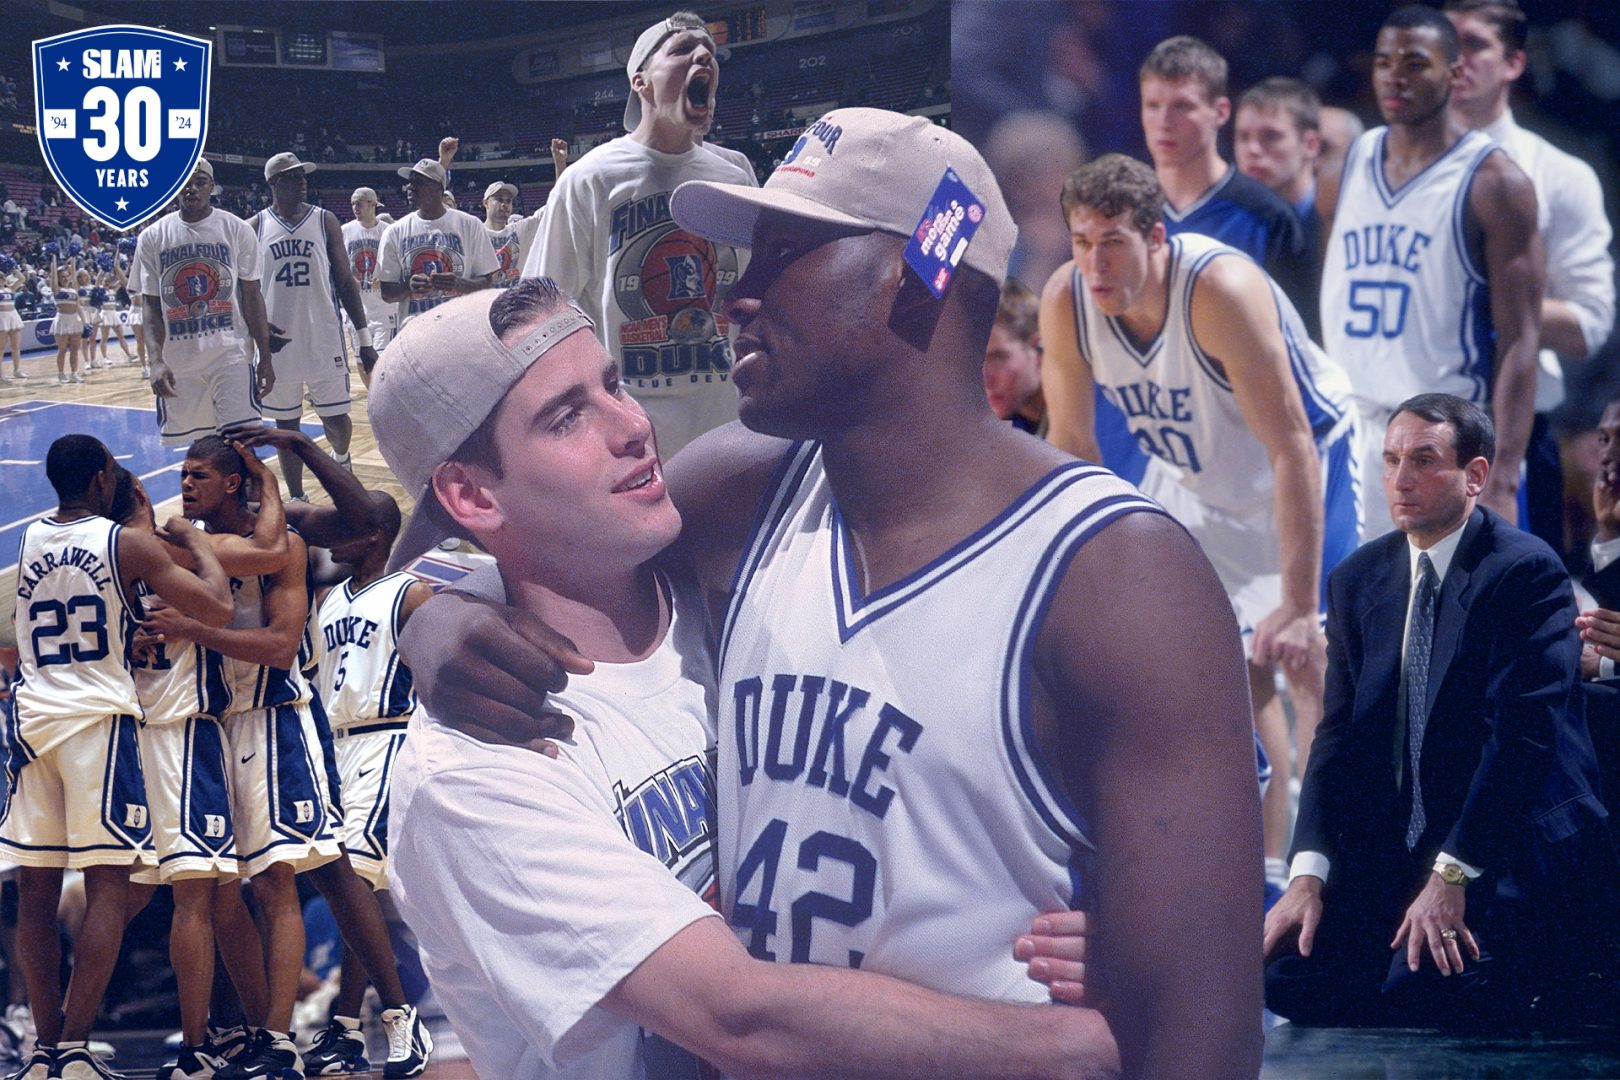 The 30 Most Influential NCAA MBB Teams of SLAM’s 30 Years: Full List